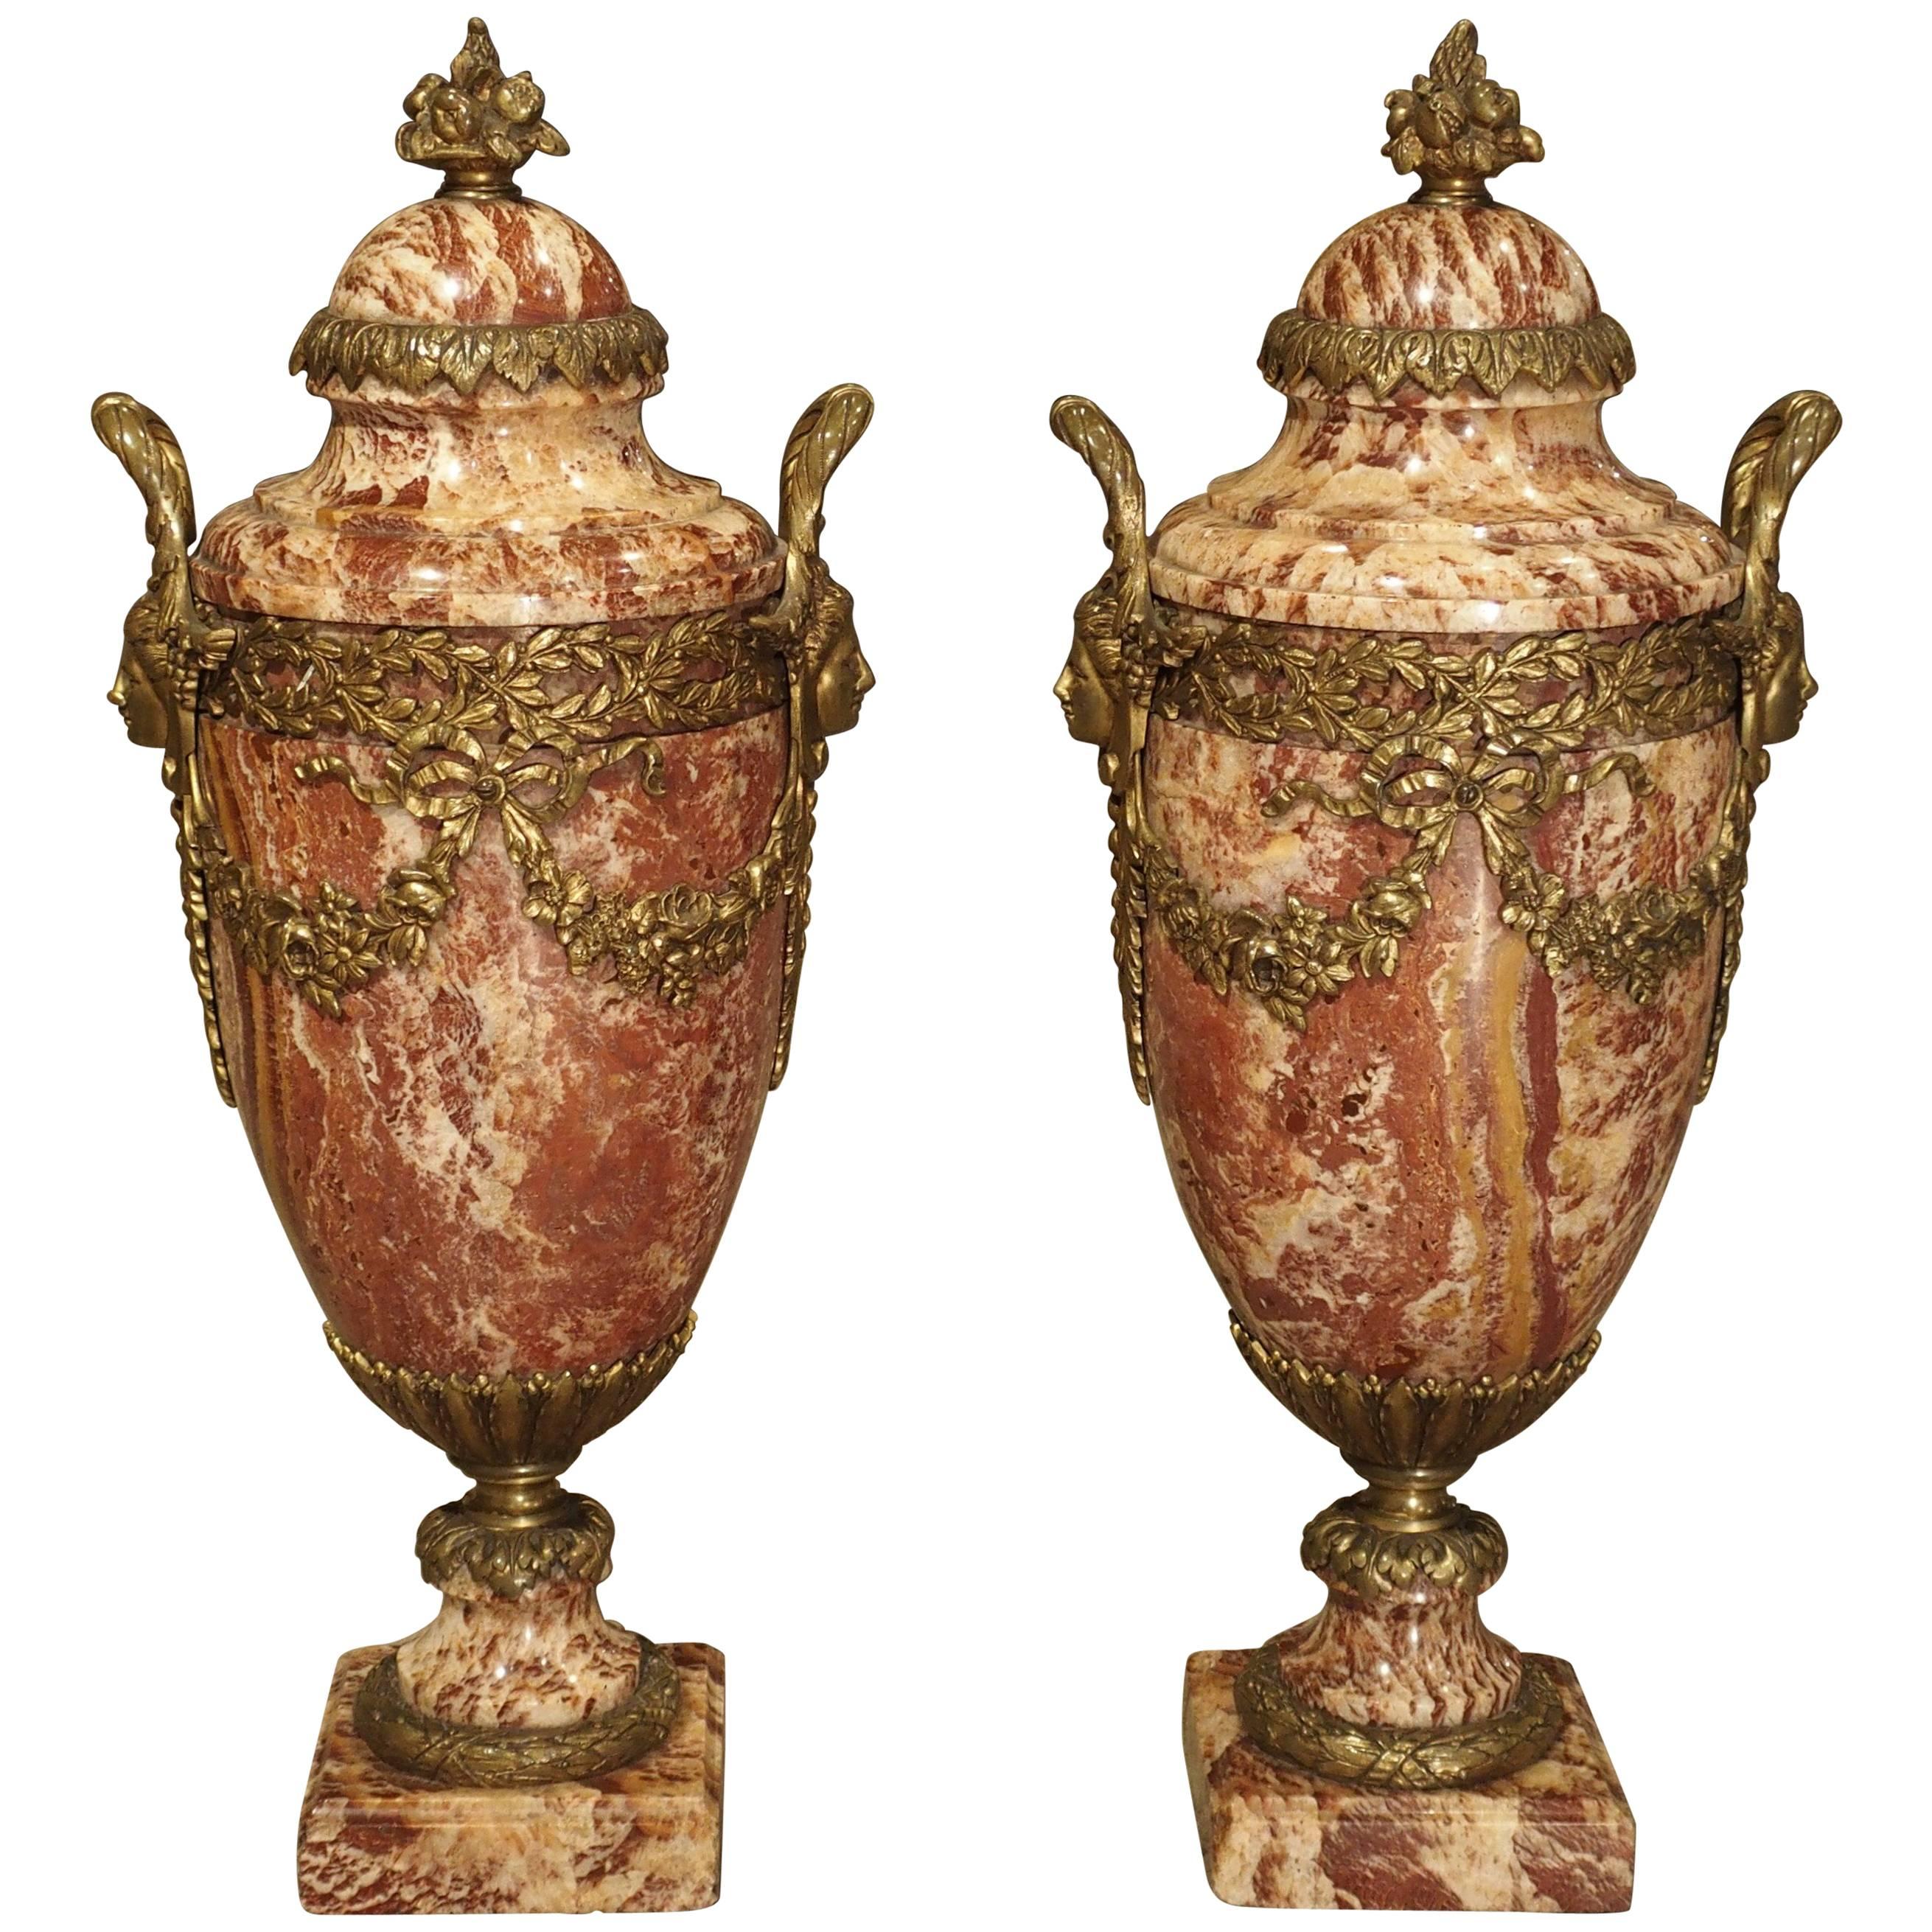 Pair of Gilt Bronze and Marble Cassolettes from France, circa 1880